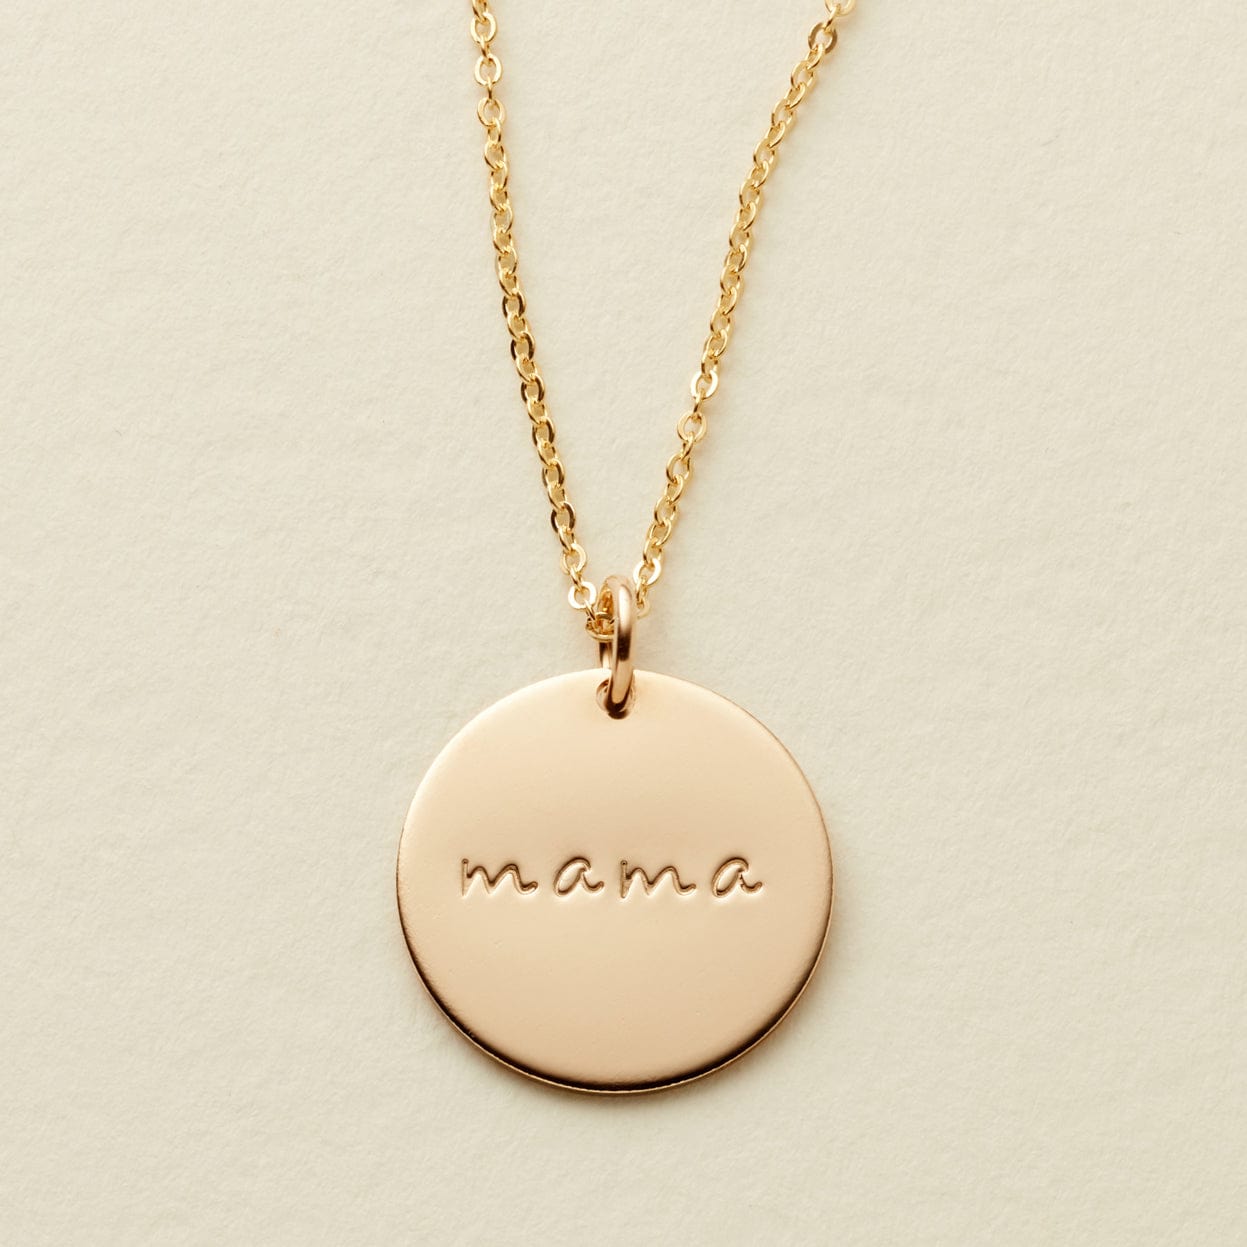 Mama Disc Necklace - 5/8" Necklace